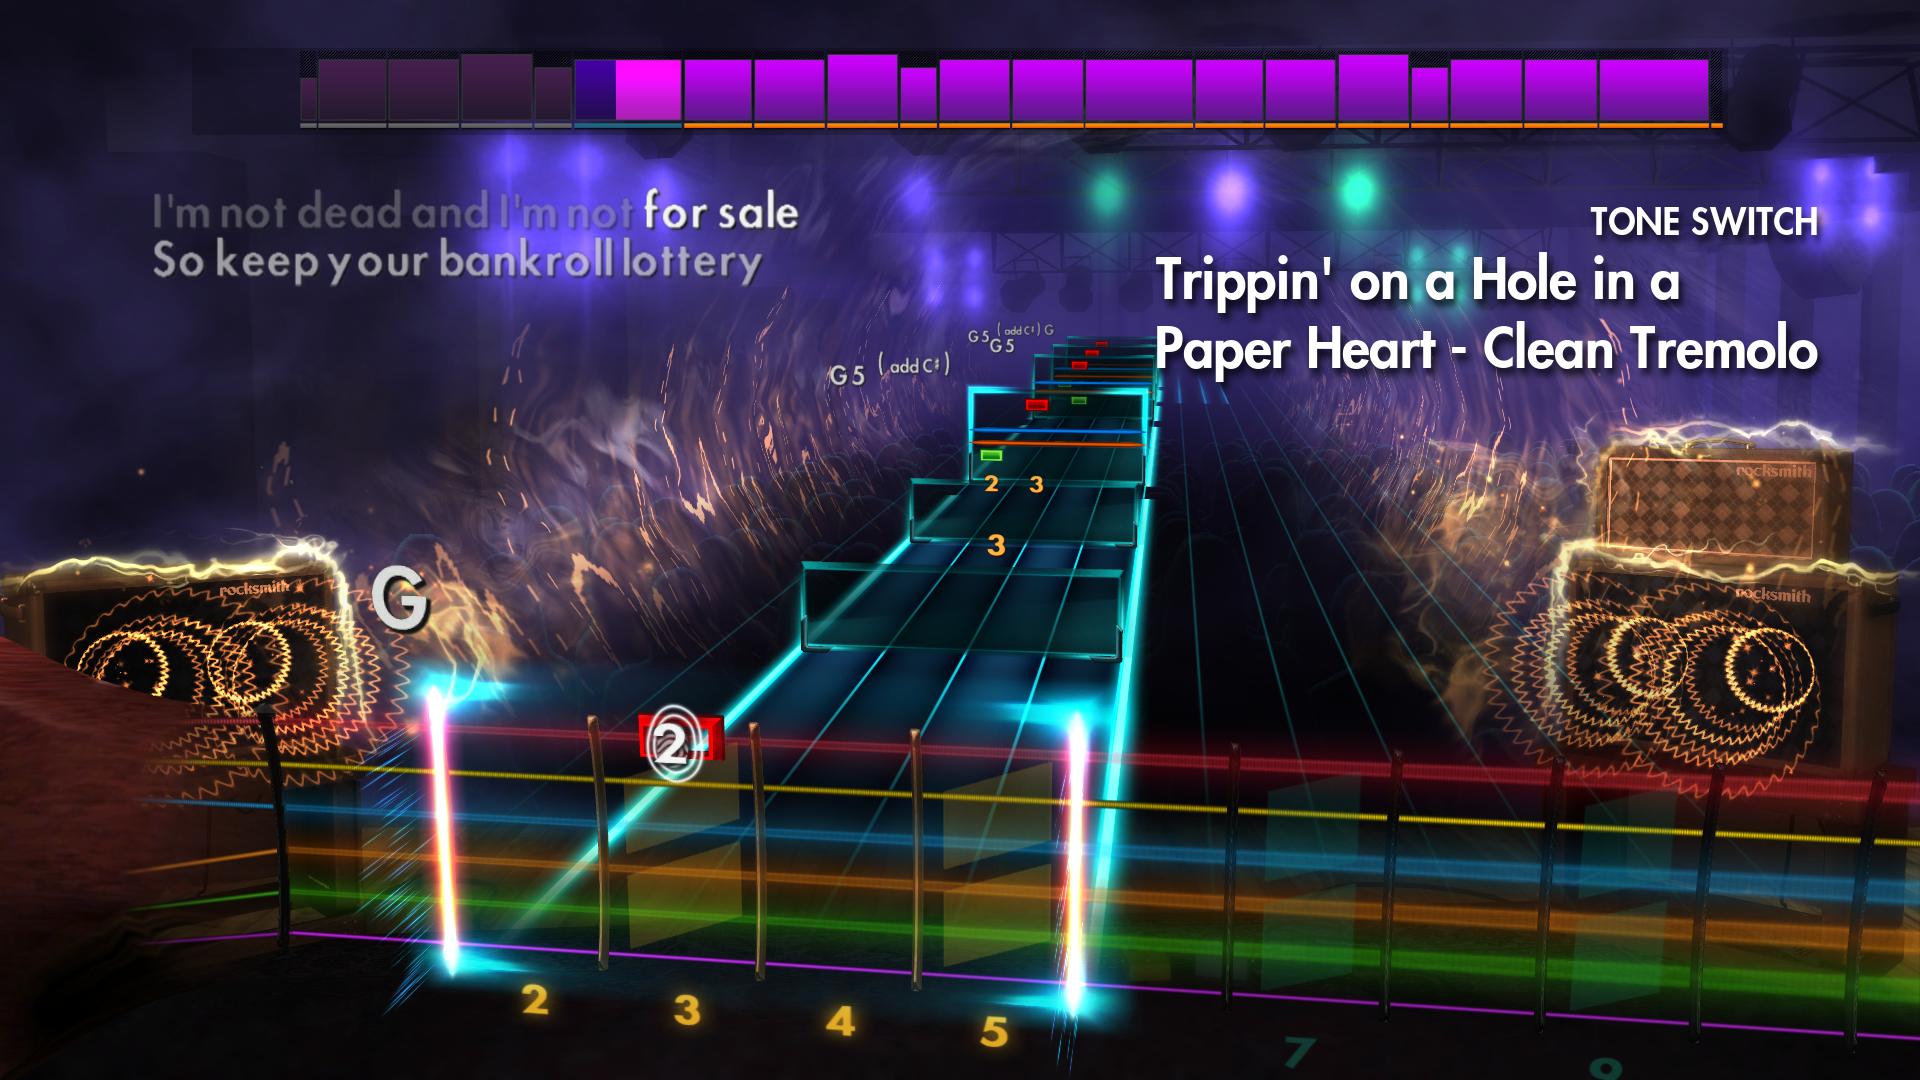 Rocksmith 2014 Edition – Remastered – Stone Temple Pilots - “Trippin’ on a Hole in a Paper Heart” screenshot